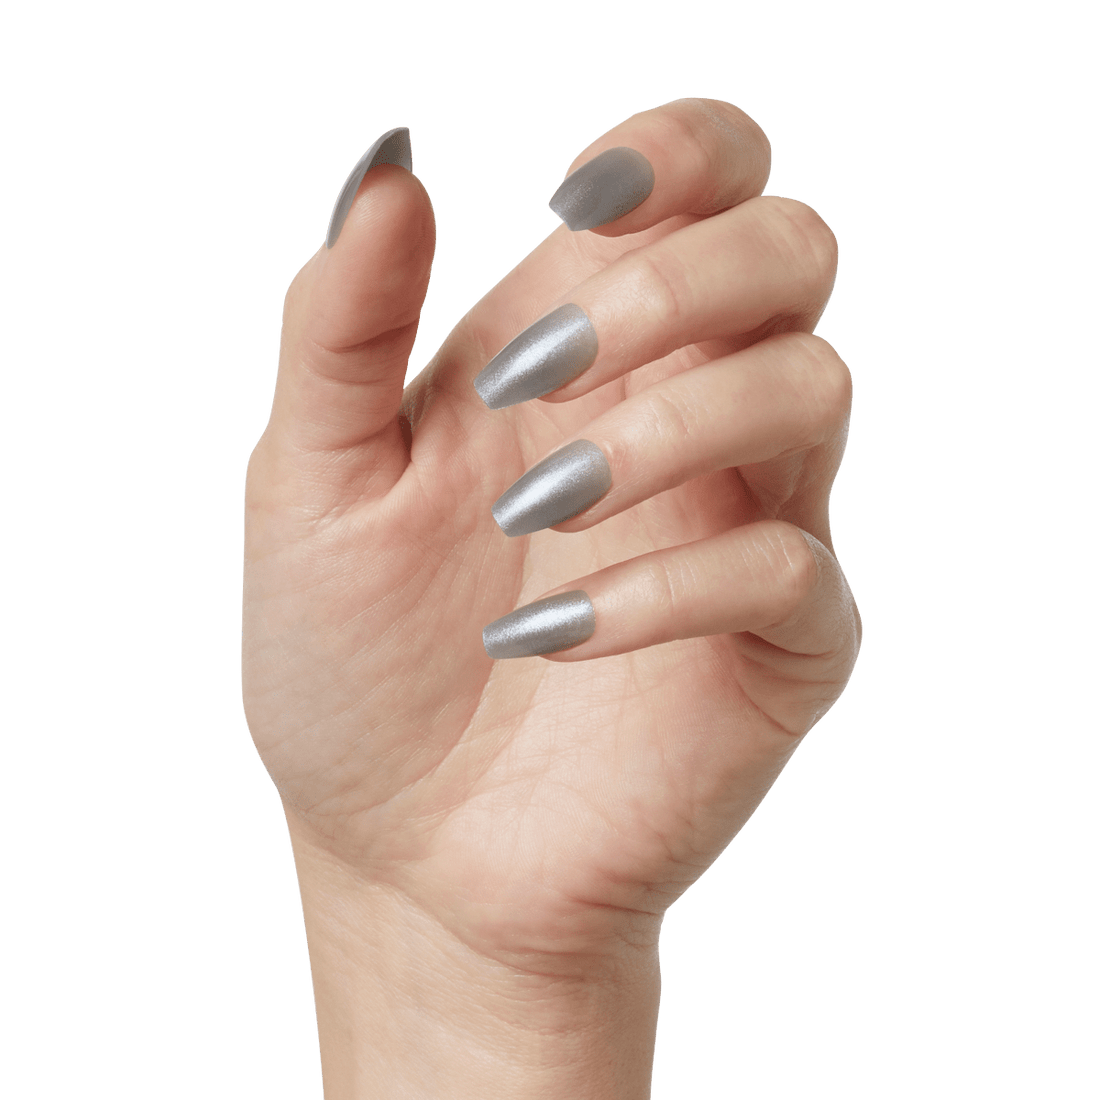 KISS Bare But Better, Press-On Nails, Icing, Gray, Med Coffin, 28ct